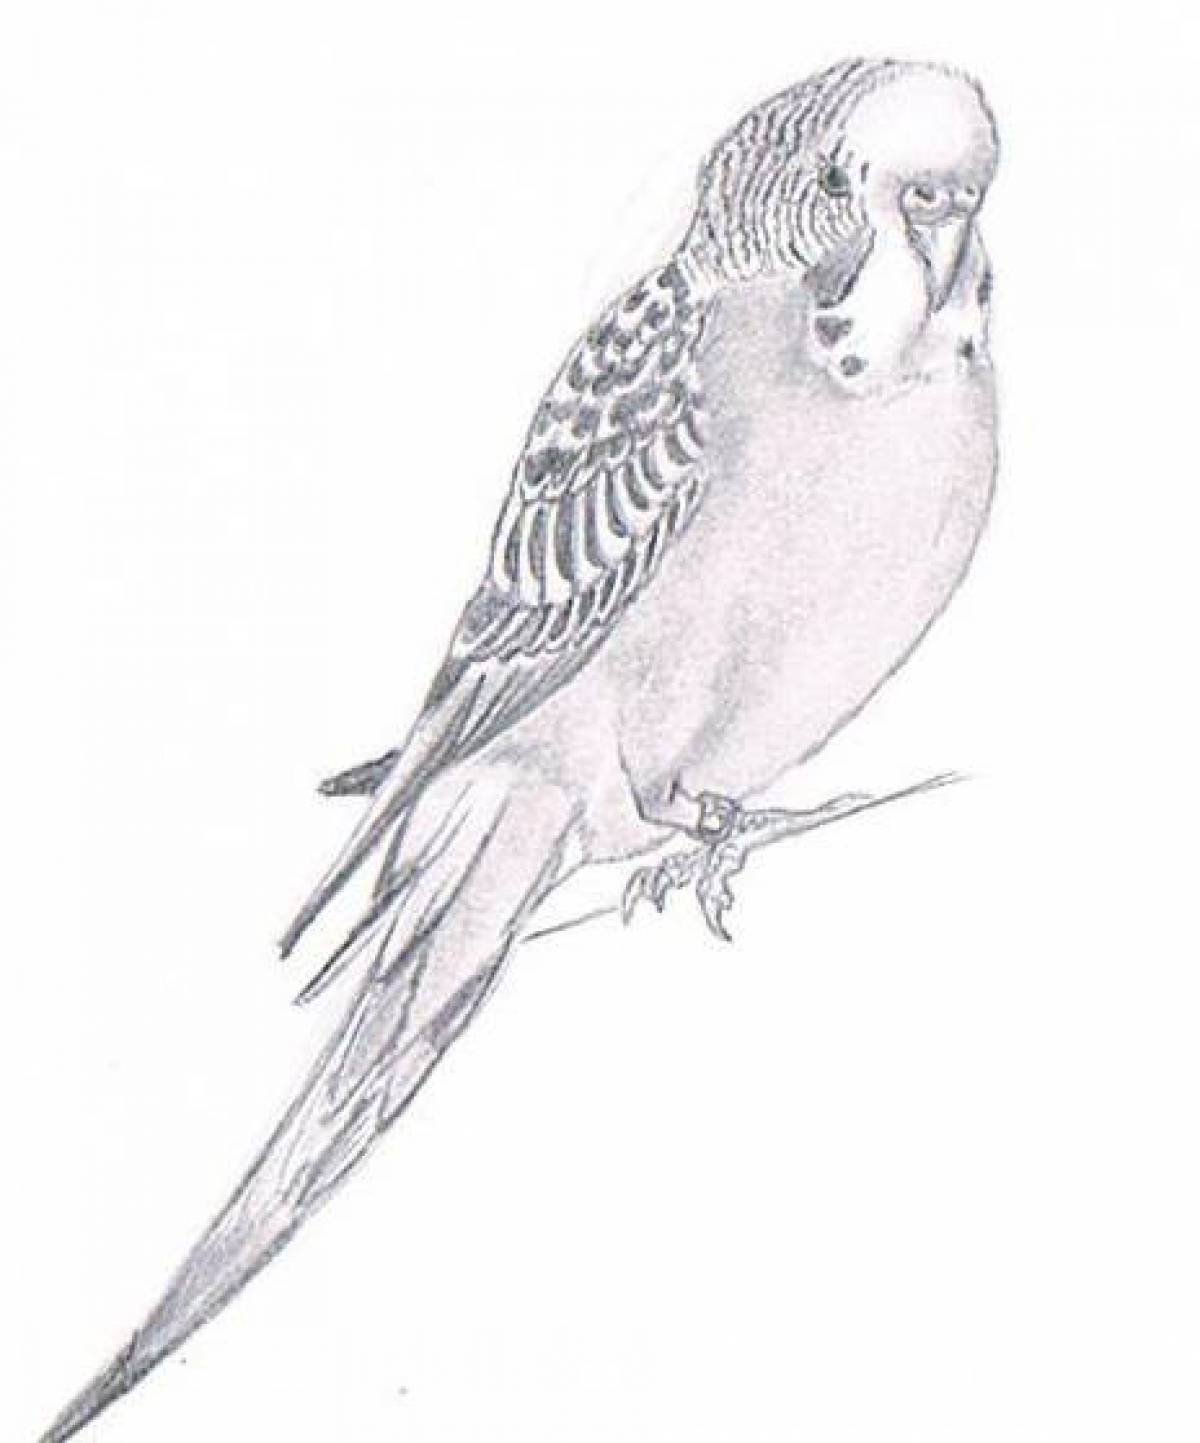 Charming budgerigar coloring page